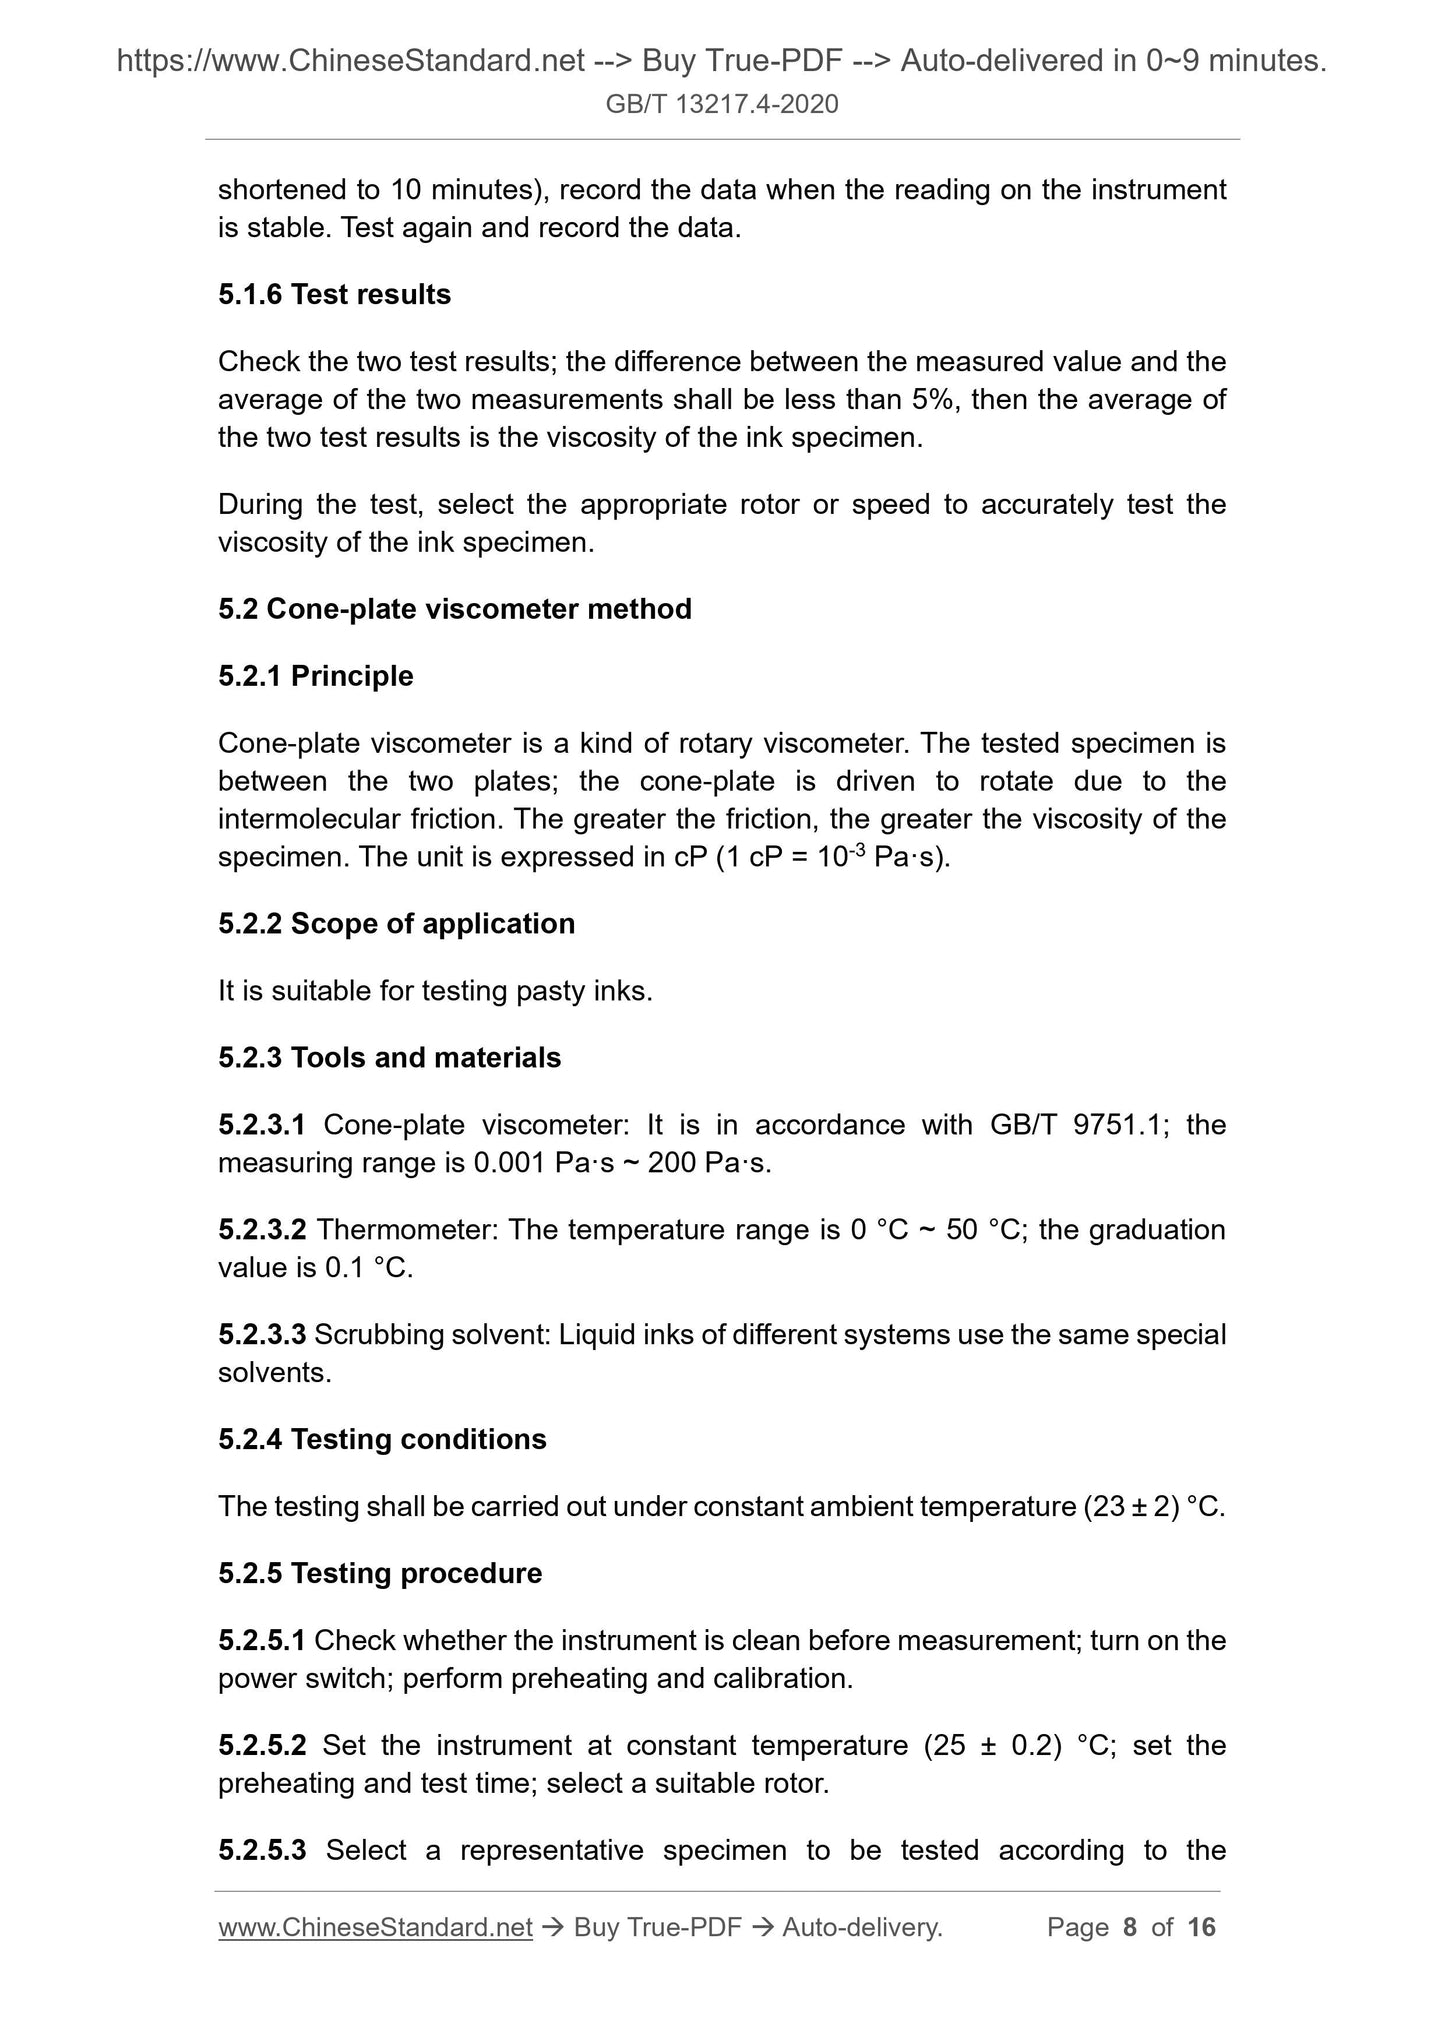 GB/T 13217.4-2020 Page 5